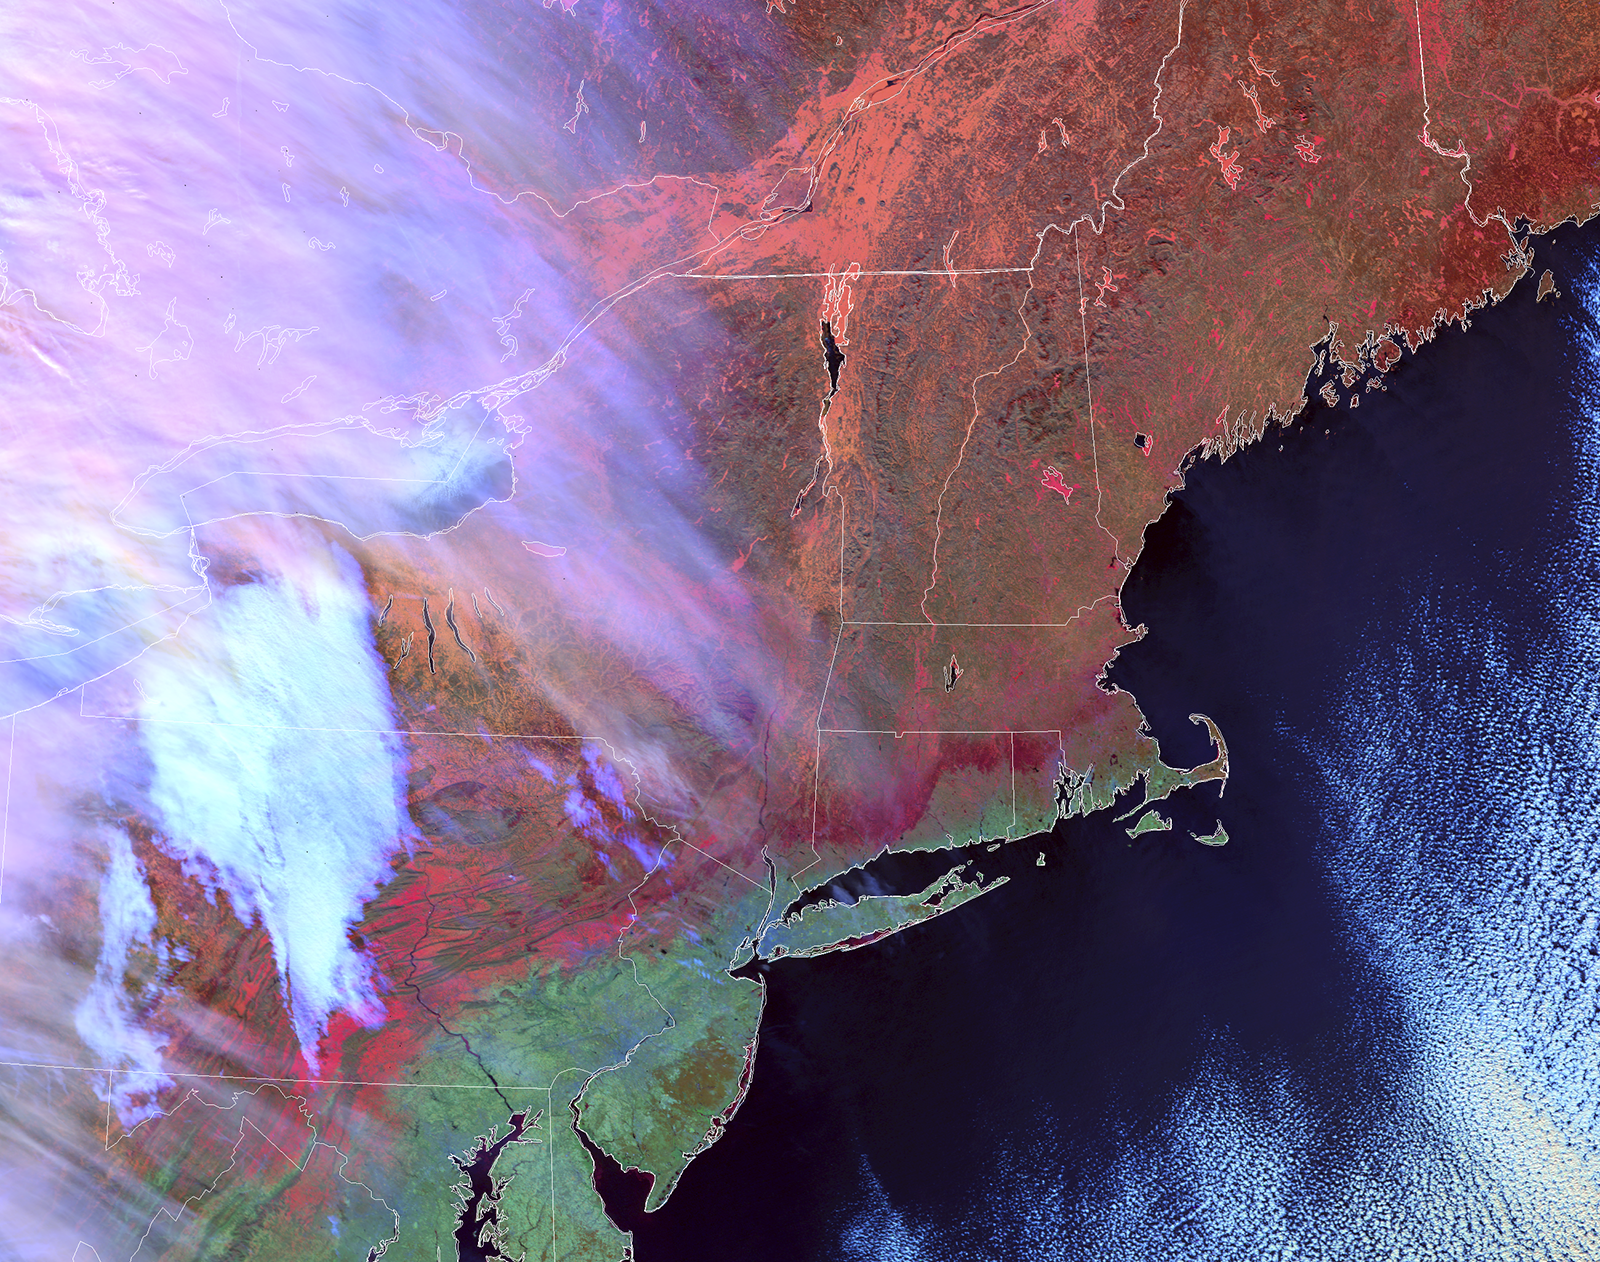 An infrared image of the northeastern United States, including Connecticut, in shades of red and green. A white cloud covers the westernmost part of the image.